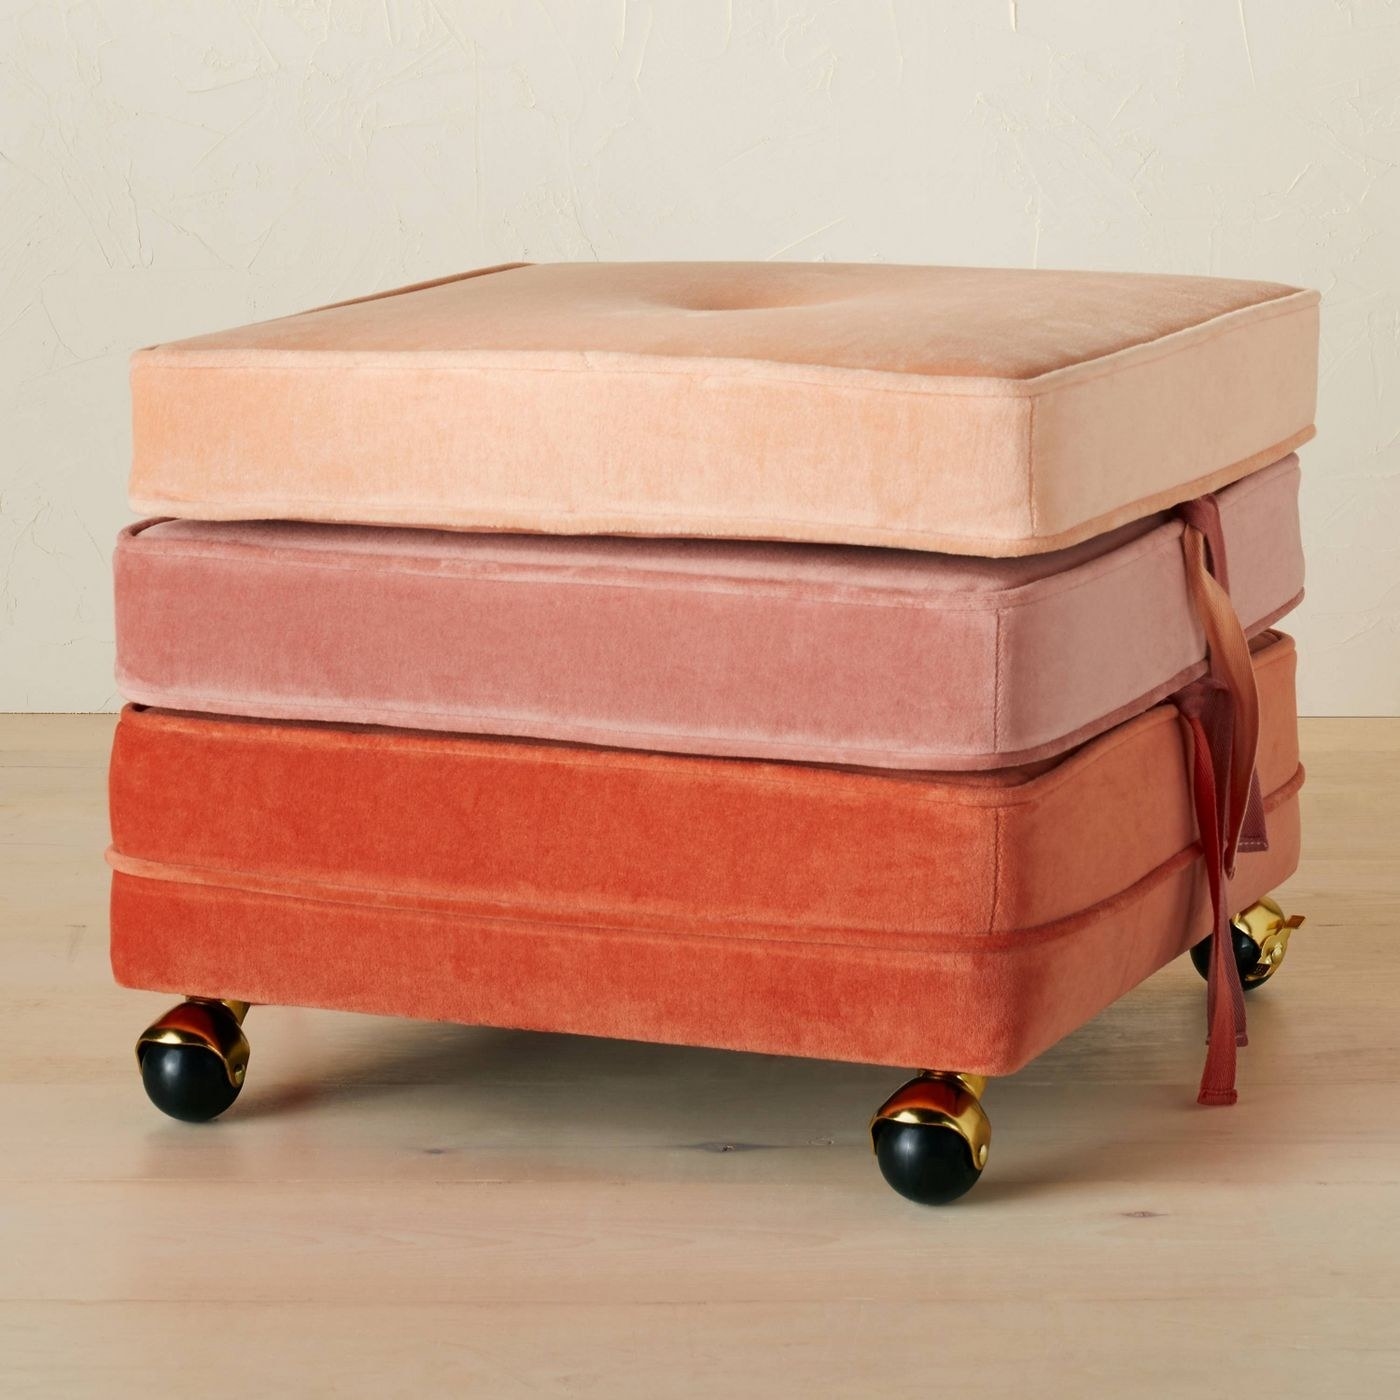 the orange and peach ombre cushions